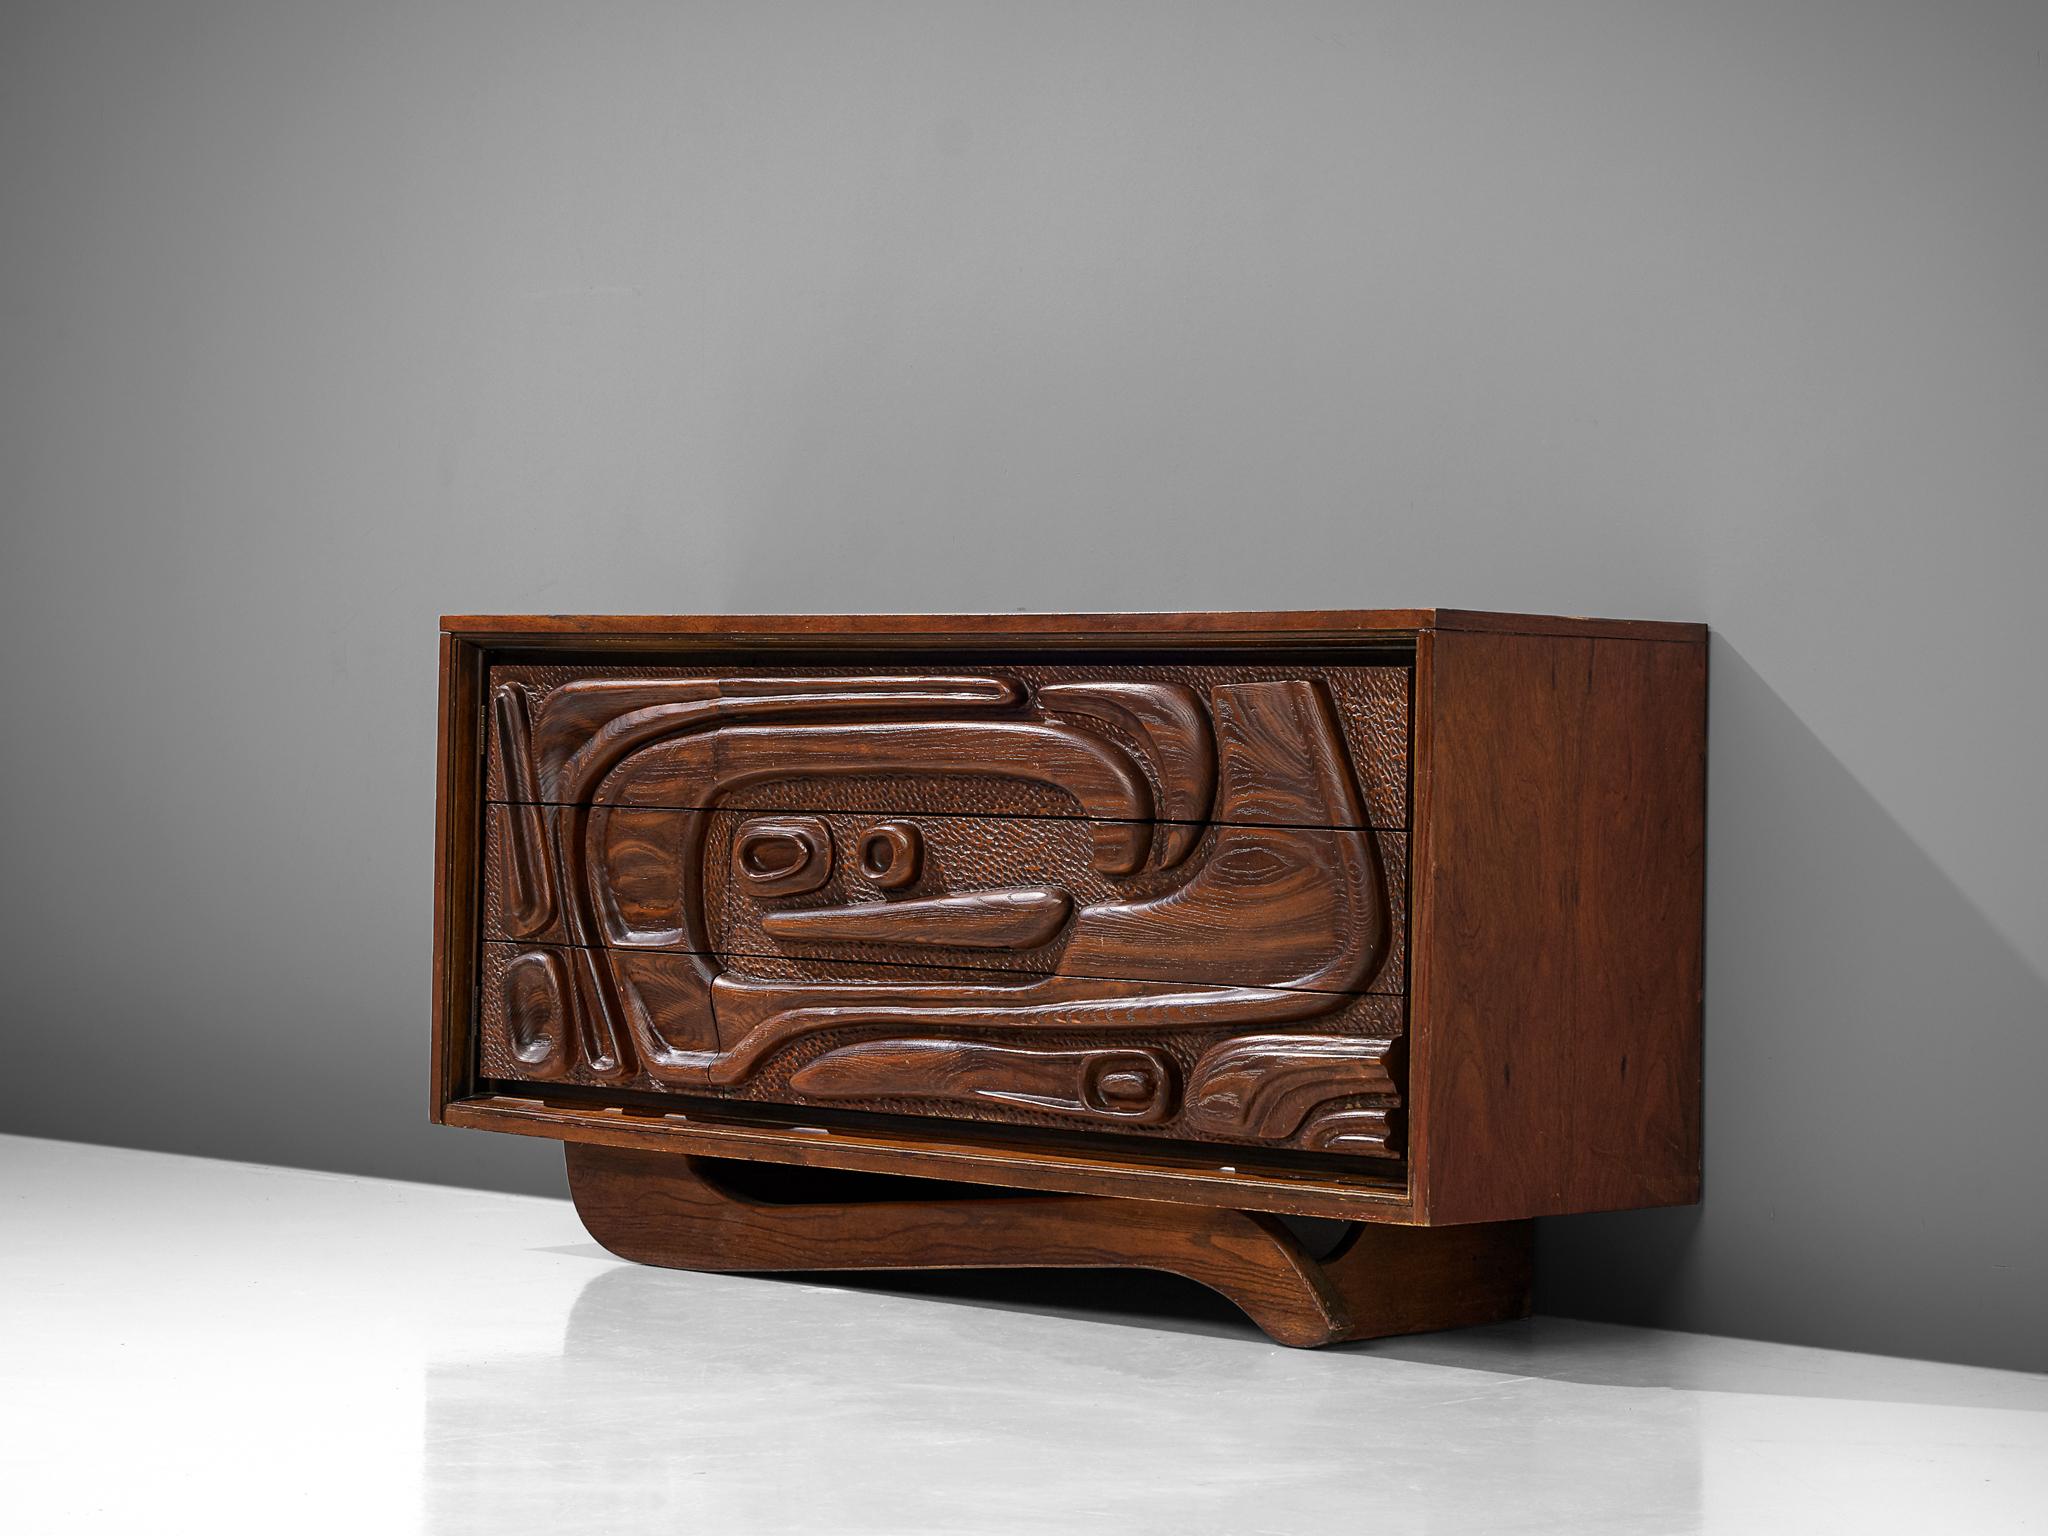 Pulaski Furniture Corporation, attributed to Witco, sideboard, walnut and molded plastic, United States, 1960s

A carved cabinet in walnut by Pulaski Furniture Corporation. The wildly carved front shows an organic, tribal inspired structure. The